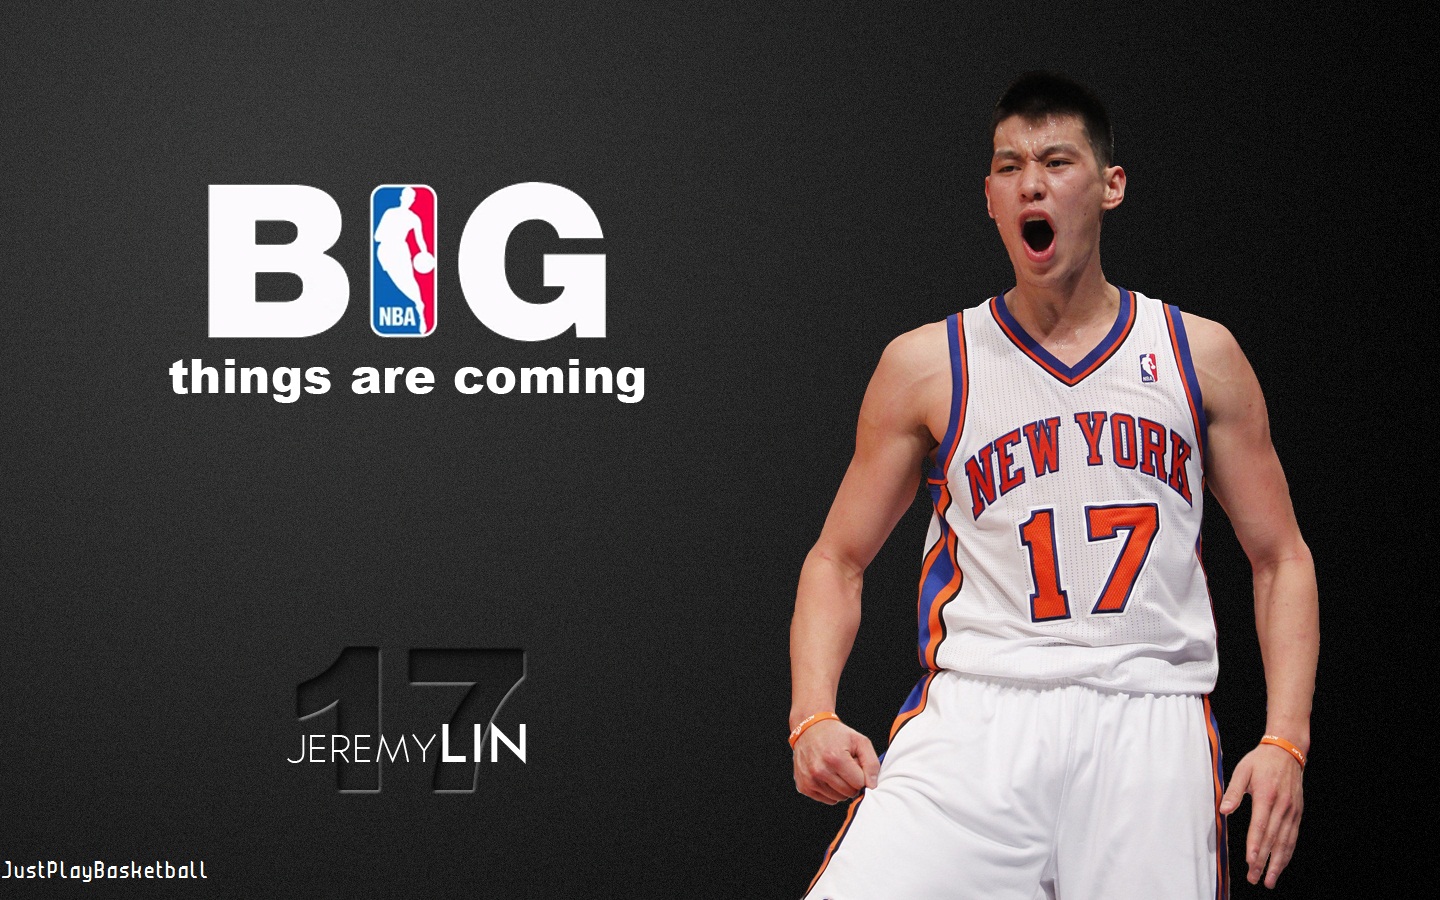 Jeremy Lin The Rising NBA Star | Information, Wallpapers, Highlights | TheNbaZone.com1440 x 900